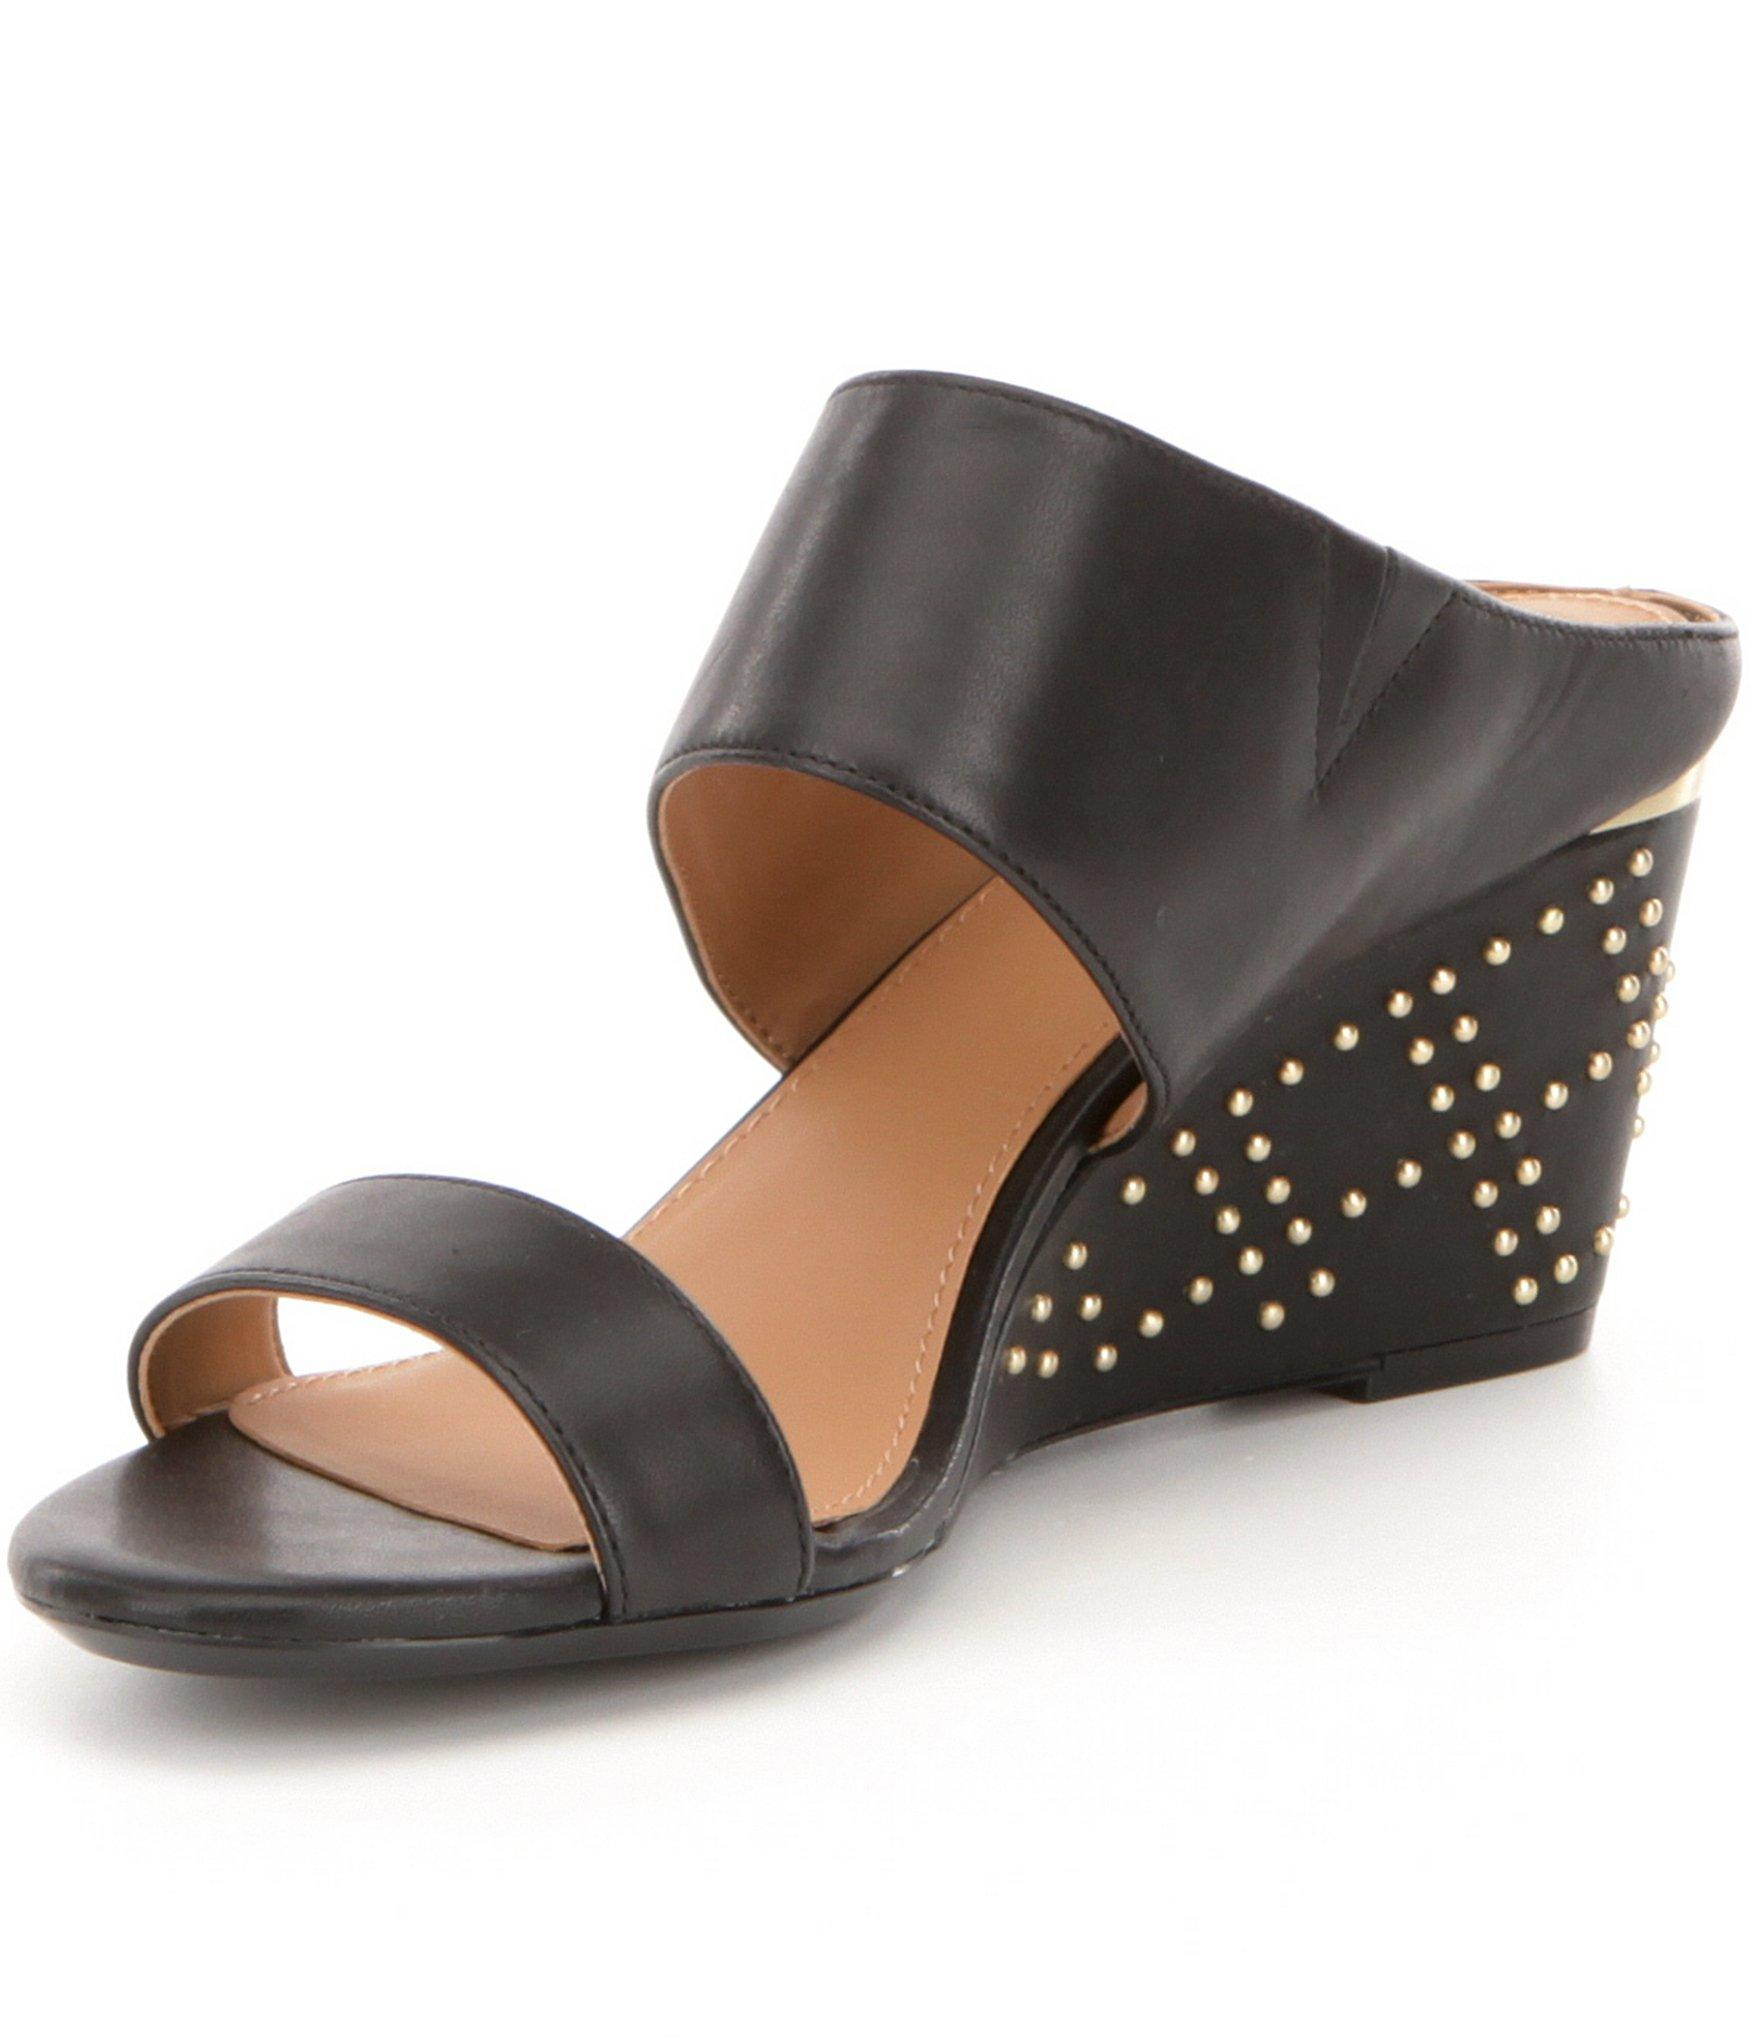 Lyst - Calvin Klein Phyllis Studded Leather Wedge Sandals in Black